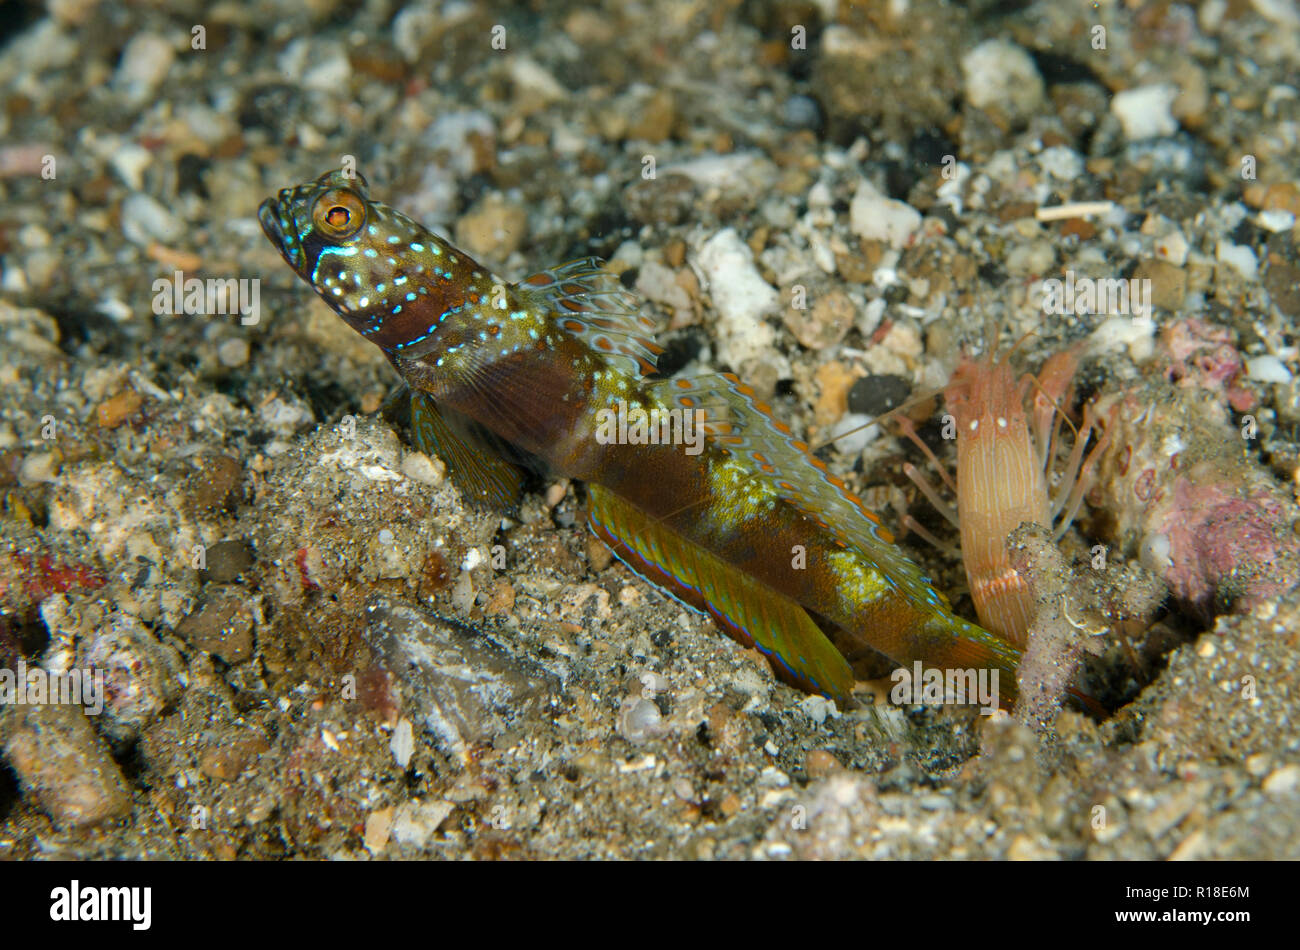 Wide-barred Goby, Amblyeleotris latifasciata, with fin extended and Snapping Shrimp (Alpheus sp), Serena Besar dive site, Lembeh Straits, Indonesia Stock Photo